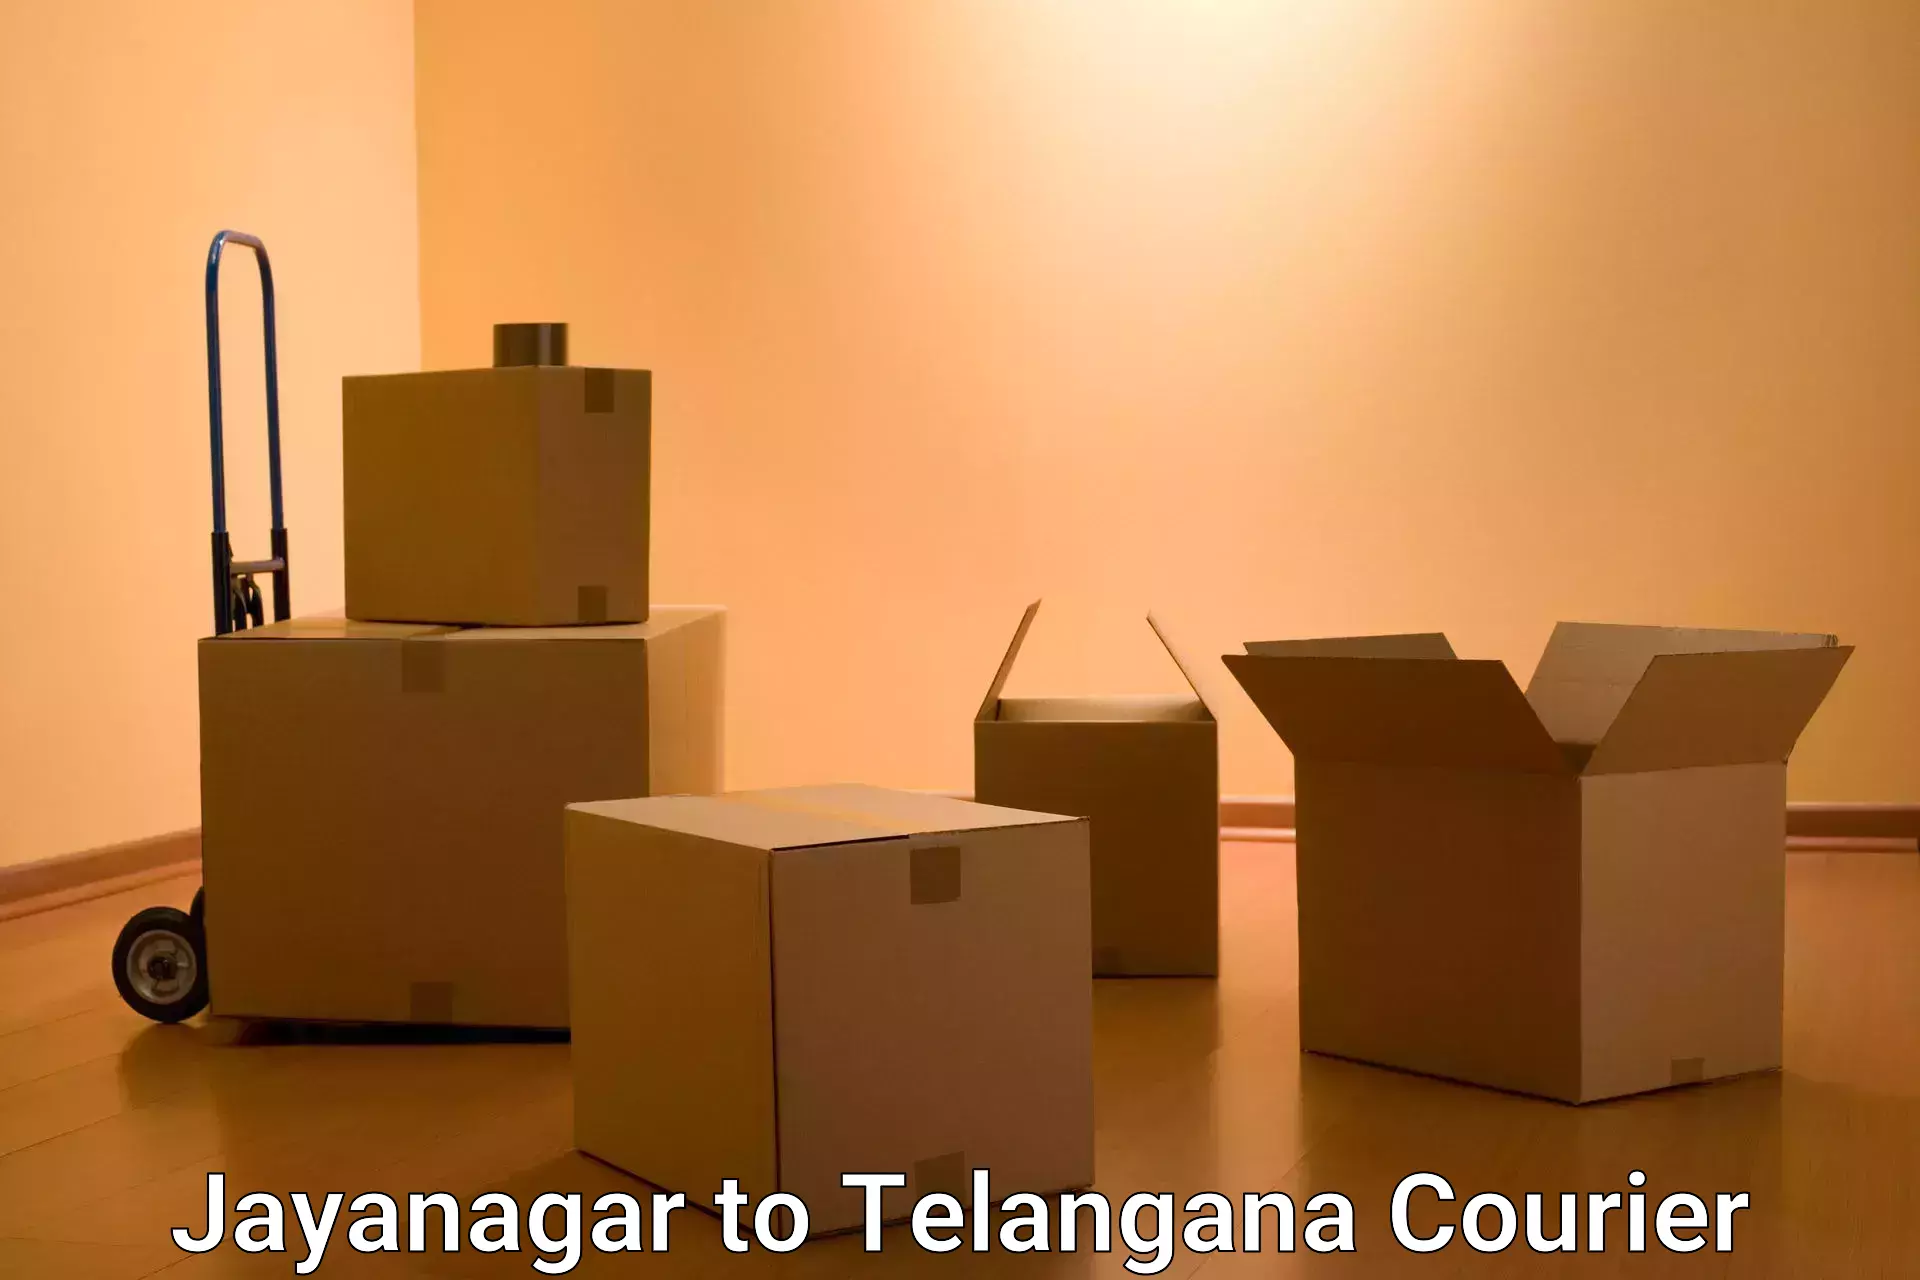 Express delivery capabilities in Jayanagar to Telangana